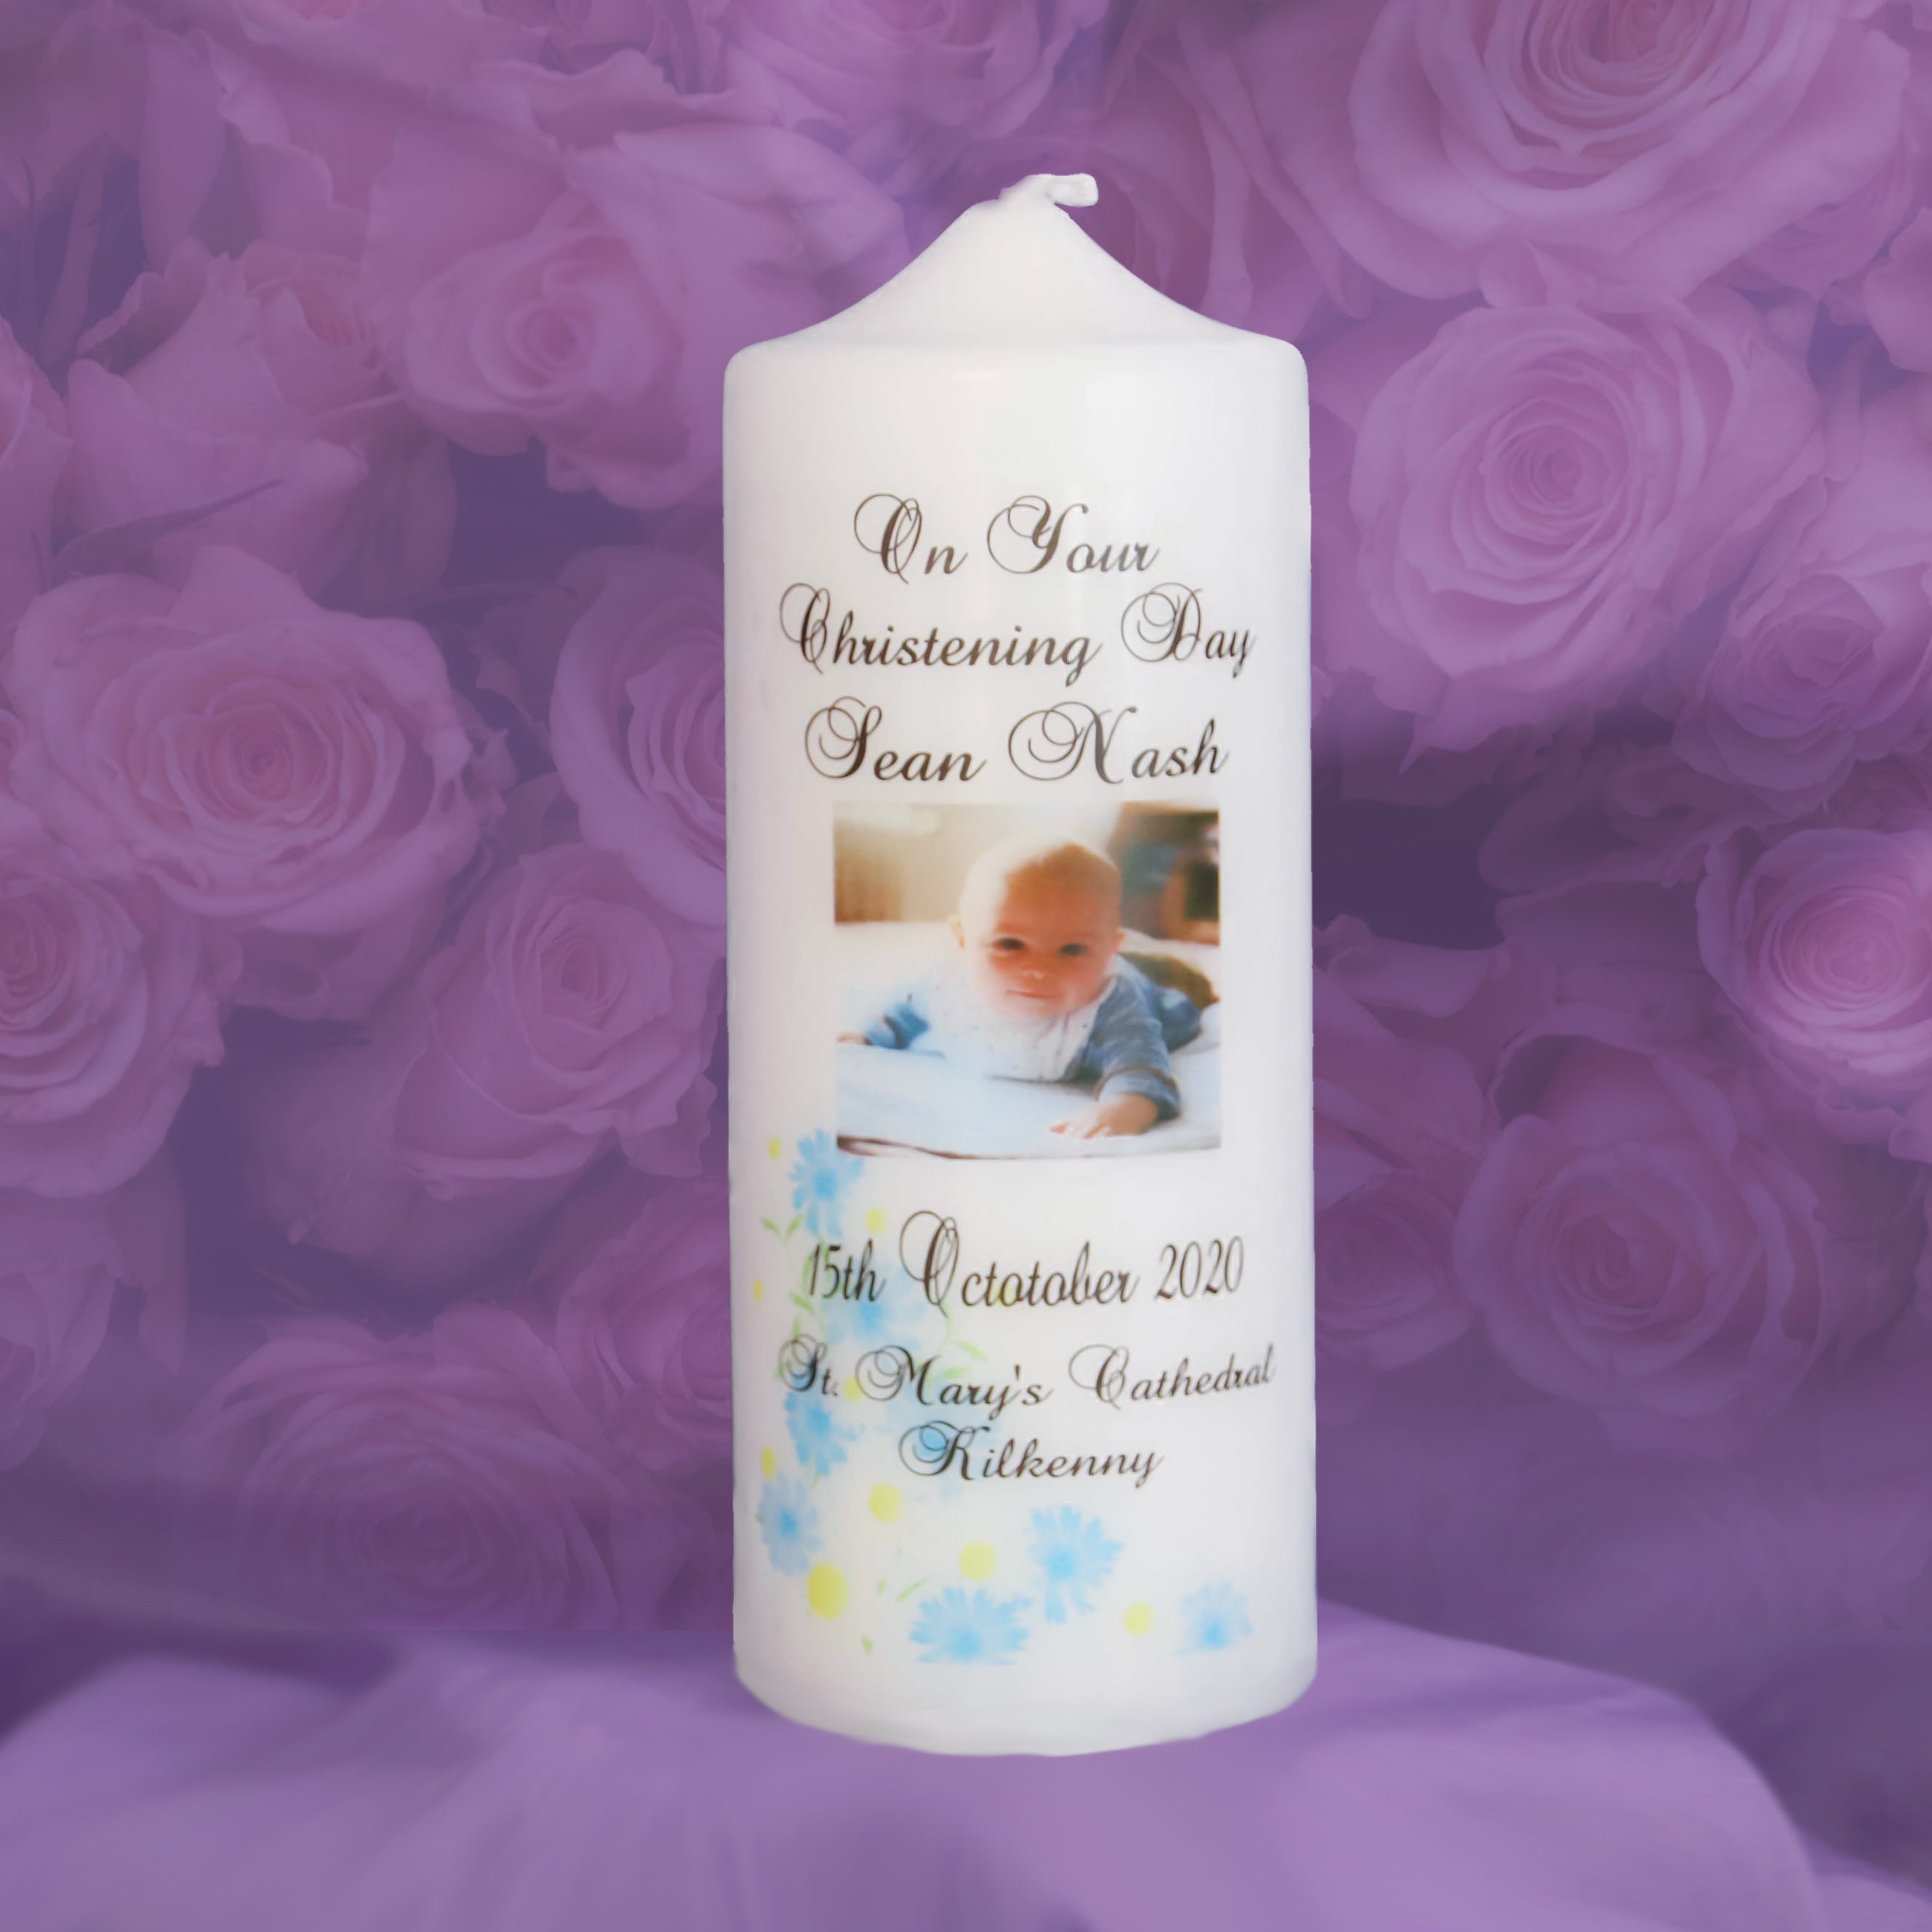 Personalised Christening Candles